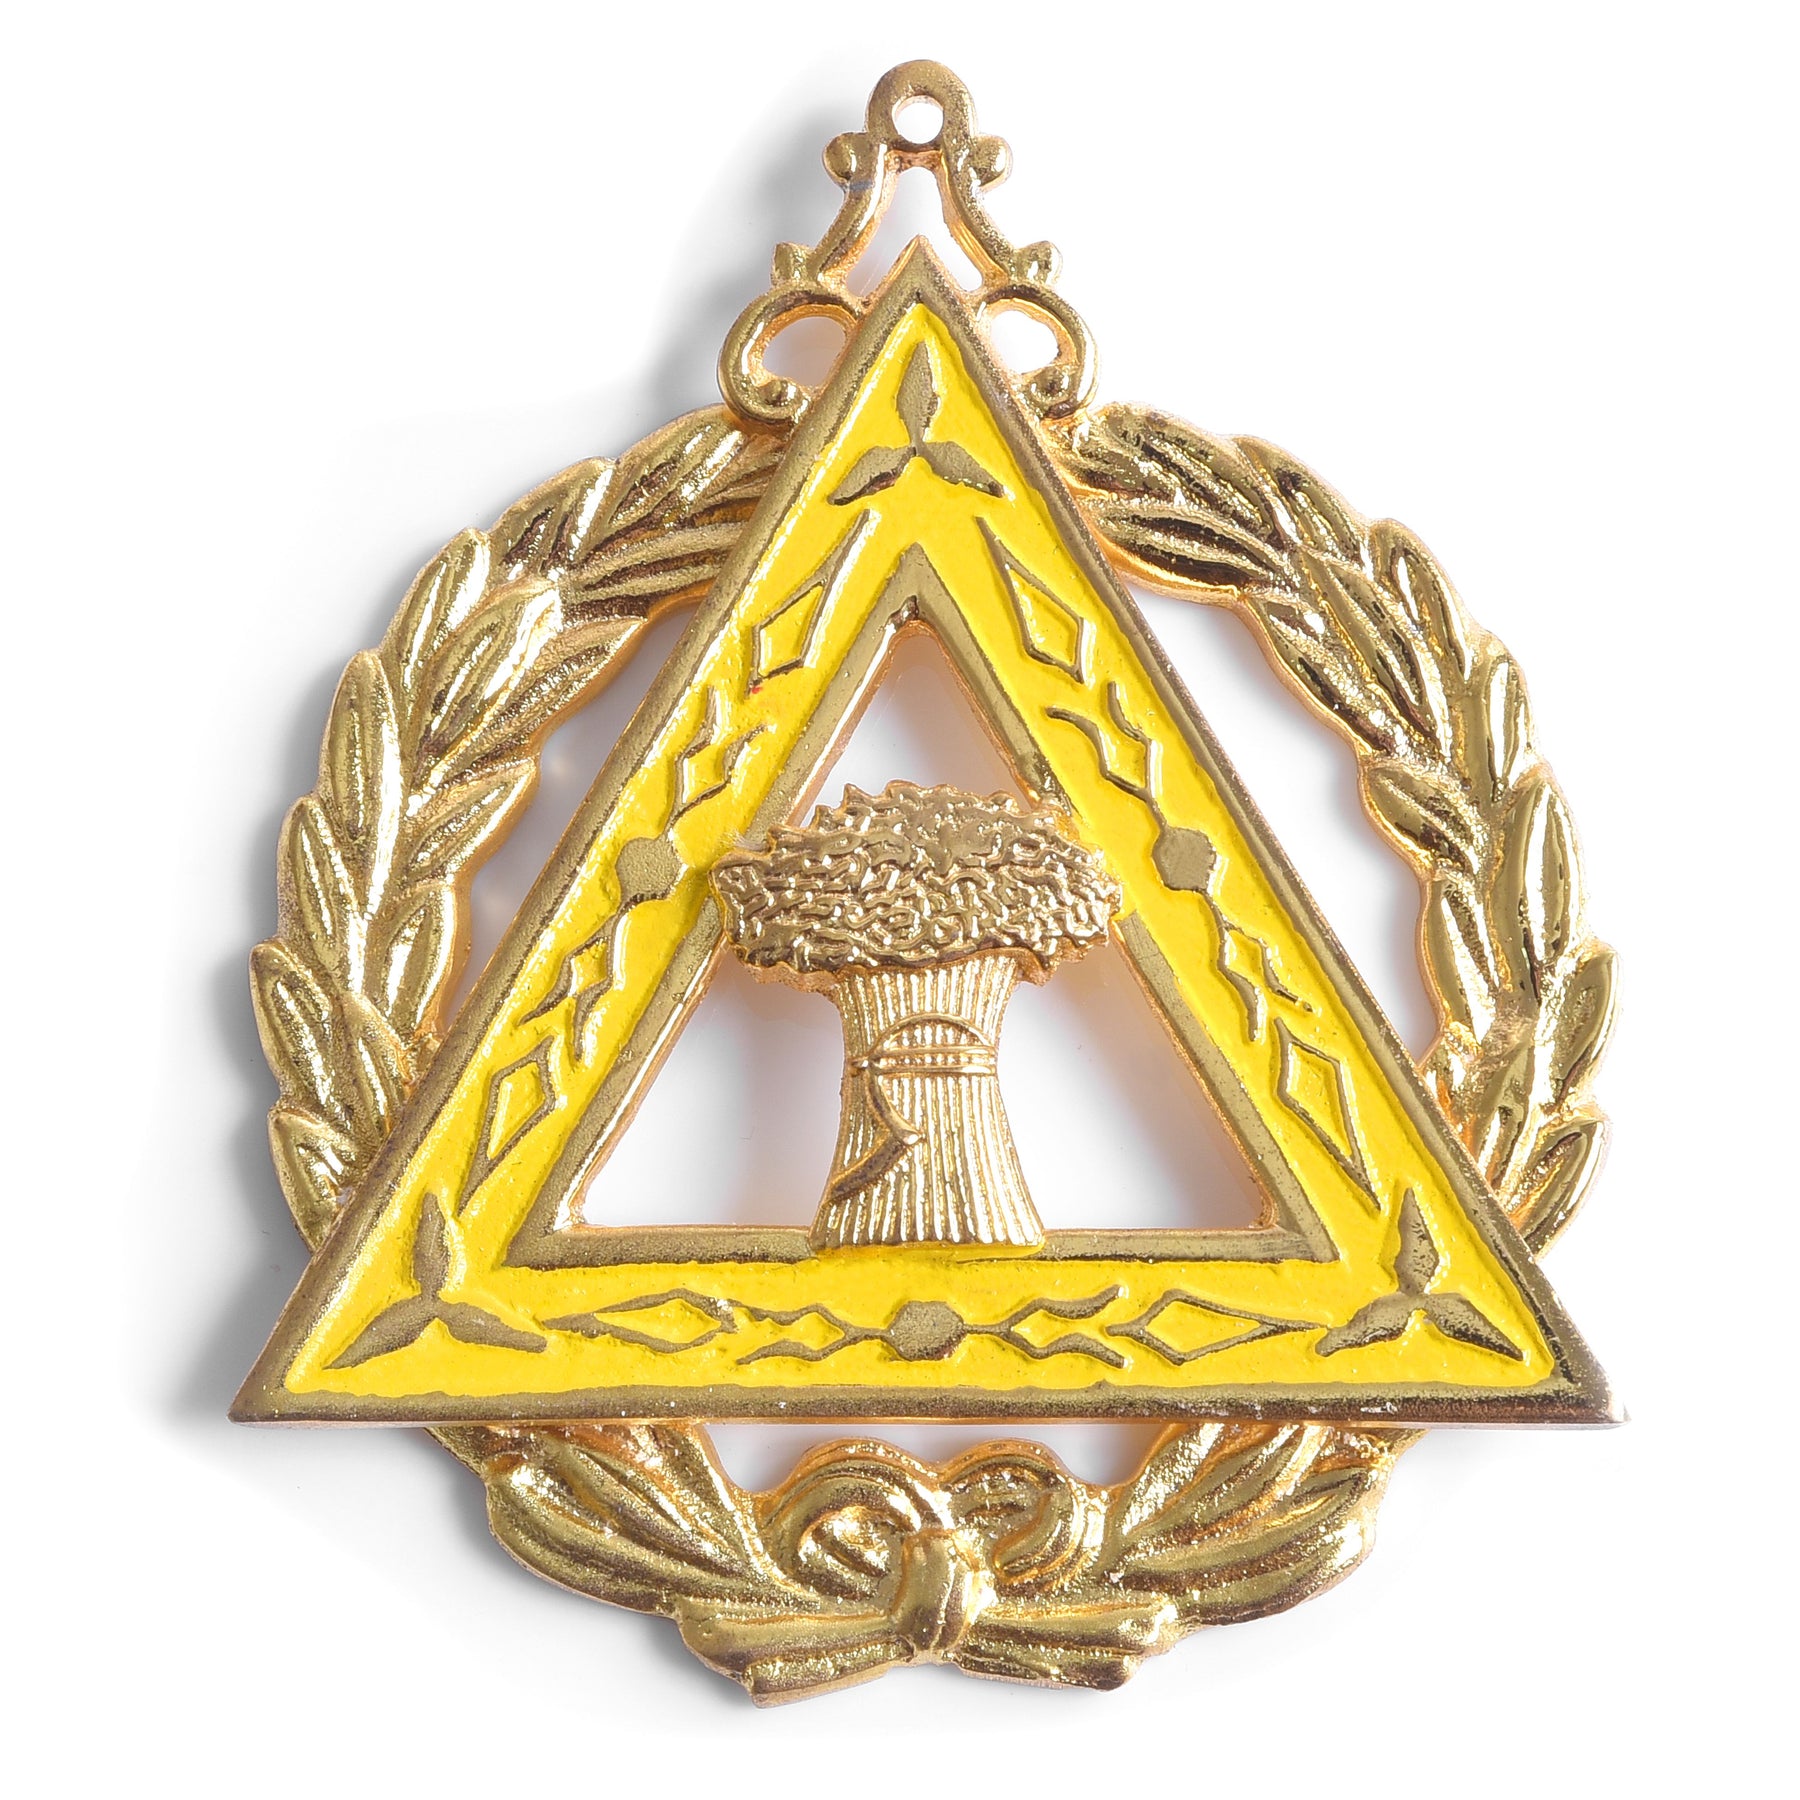 Grand Worthy Ruth OES Officer Collar Jewel - Gold Plated With Yellow - Bricks Masons